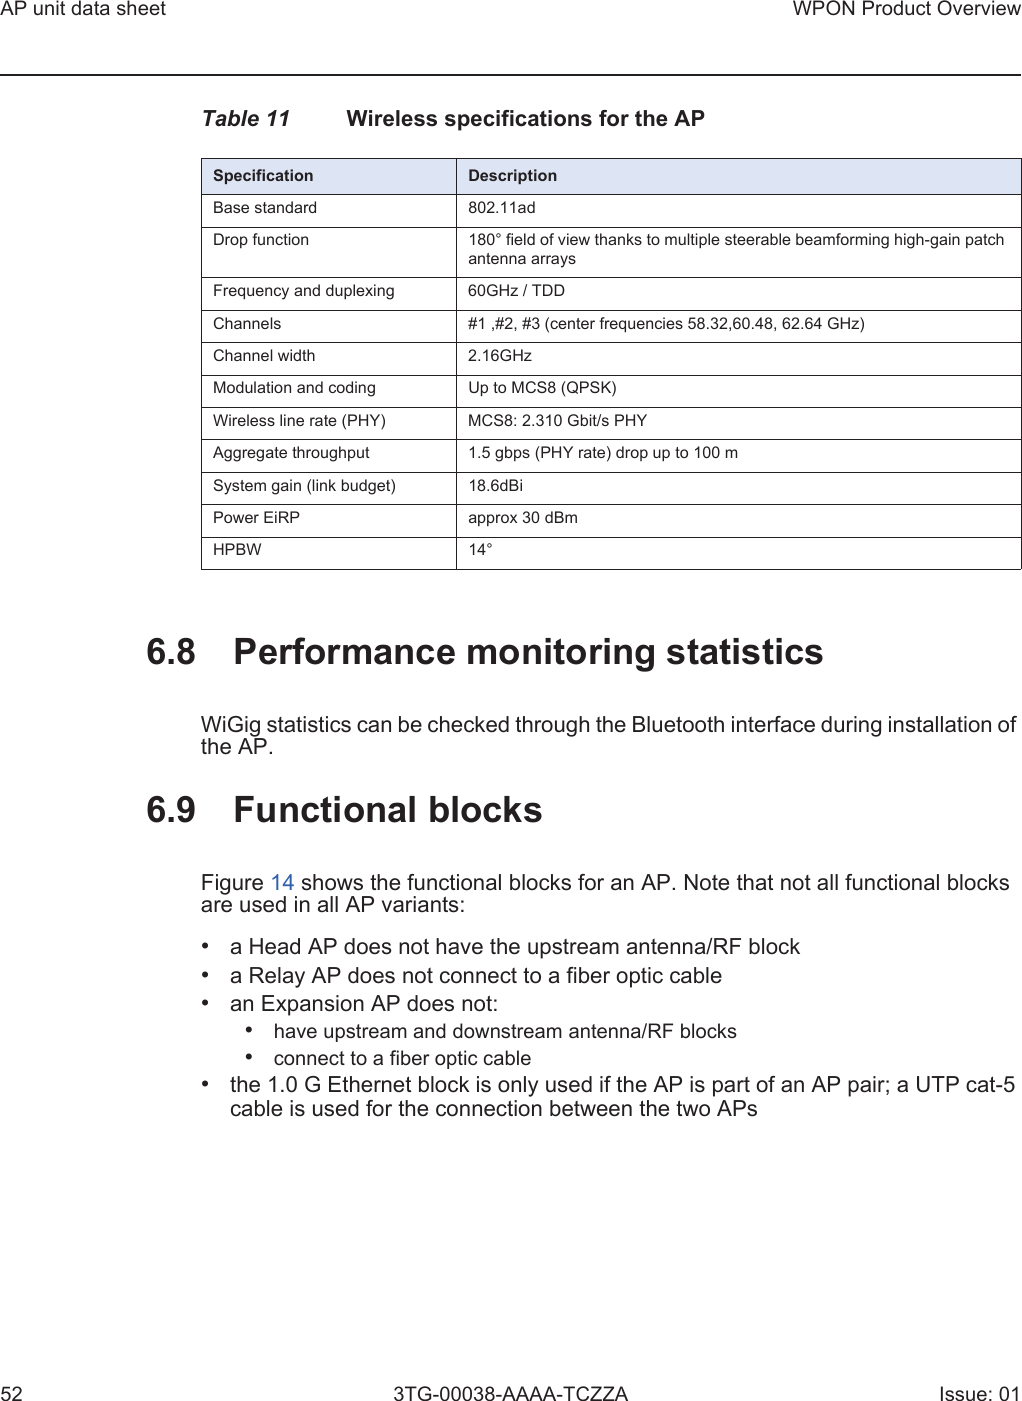 AP unit data sheet52WPON Product Overview3TG-00038-AAAA-TCZZA Issue: 01Table 11 Wireless specifications for the AP6.8 Performance monitoring statisticsWiGig statistics can be checked through the Bluetooth interface during installation of the AP.6.9 Functional blocksFigure 14 shows the functional blocks for an AP. Note that not all functional blocks are used in all AP variants:•a Head AP does not have the upstream antenna/RF block•a Relay AP does not connect to a fiber optic cable•an Expansion AP does not:•have upstream and downstream antenna/RF blocks•connect to a fiber optic cable•the 1.0 G Ethernet block is only used if the AP is part of an AP pair; a UTP cat-5cable is used for the connection between the two APsSpecification DescriptionBase standard 802.11adDrop function 180° field of view thanks to multiple steerable beamforming high-gain patch antenna arraysFrequency and duplexing 60GHz / TDDChannels #1 ,#2, #3 (center frequencies 58.32,60.48, 62.64 GHz) Channel width 2.16GHzModulation and coding Up to MCS8 (QPSK)Wireless line rate (PHY) MCS8: 2.310 Gbit/s PHYAggregate throughput 1.5 gbps (PHY rate) drop up to 100 mSystem gain (link budget) 18.6dBi Power EiRP approx 30 dBm HPBW 14°